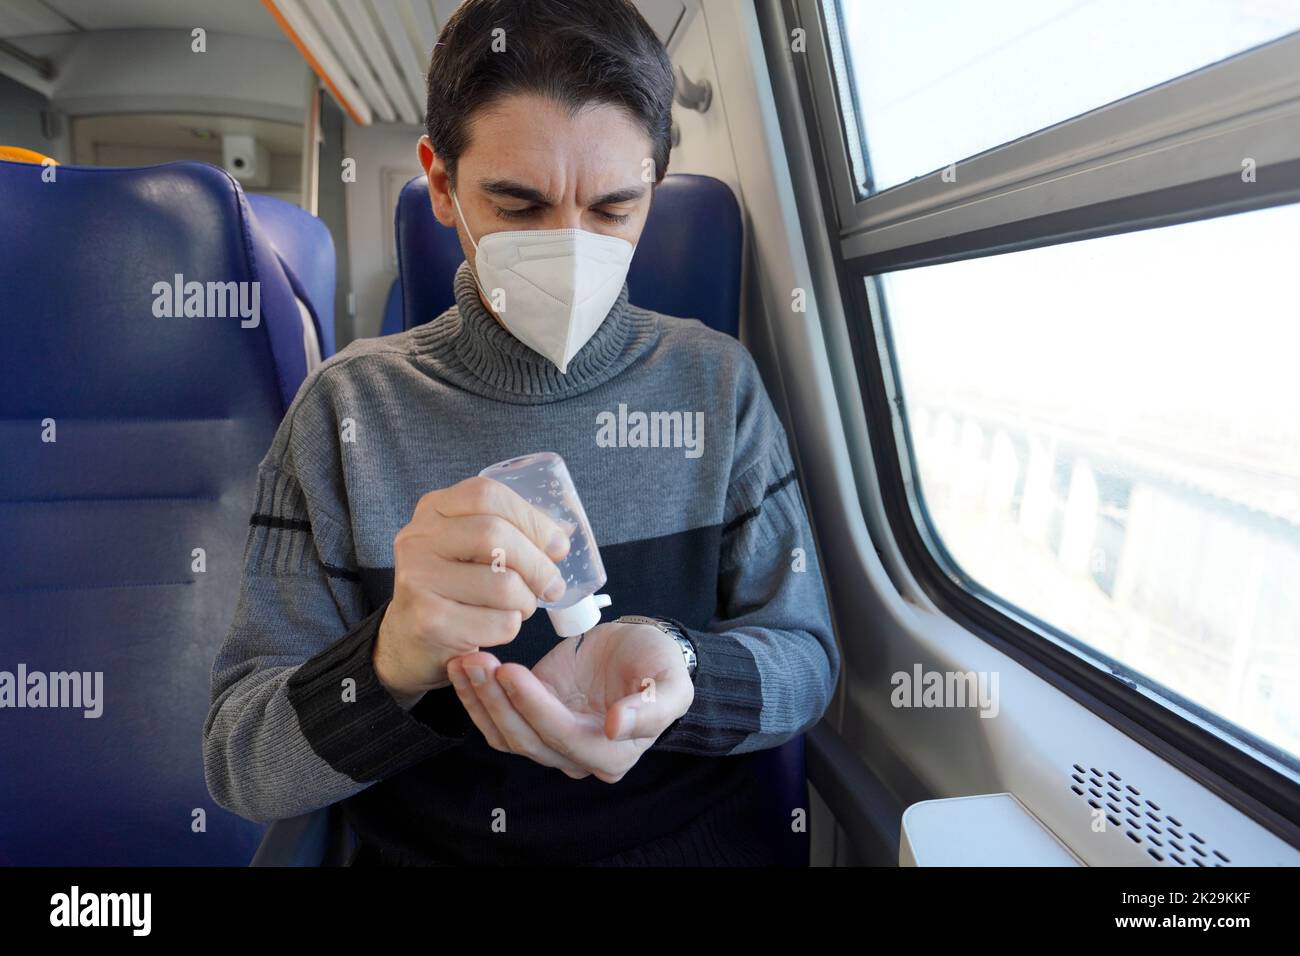 Travel safely on public transport. Young man with protective face mask disinfects hands from alcohol gel dispenser. Passenger with medical mask sanitizing hands inside train carriage. Stock Photo